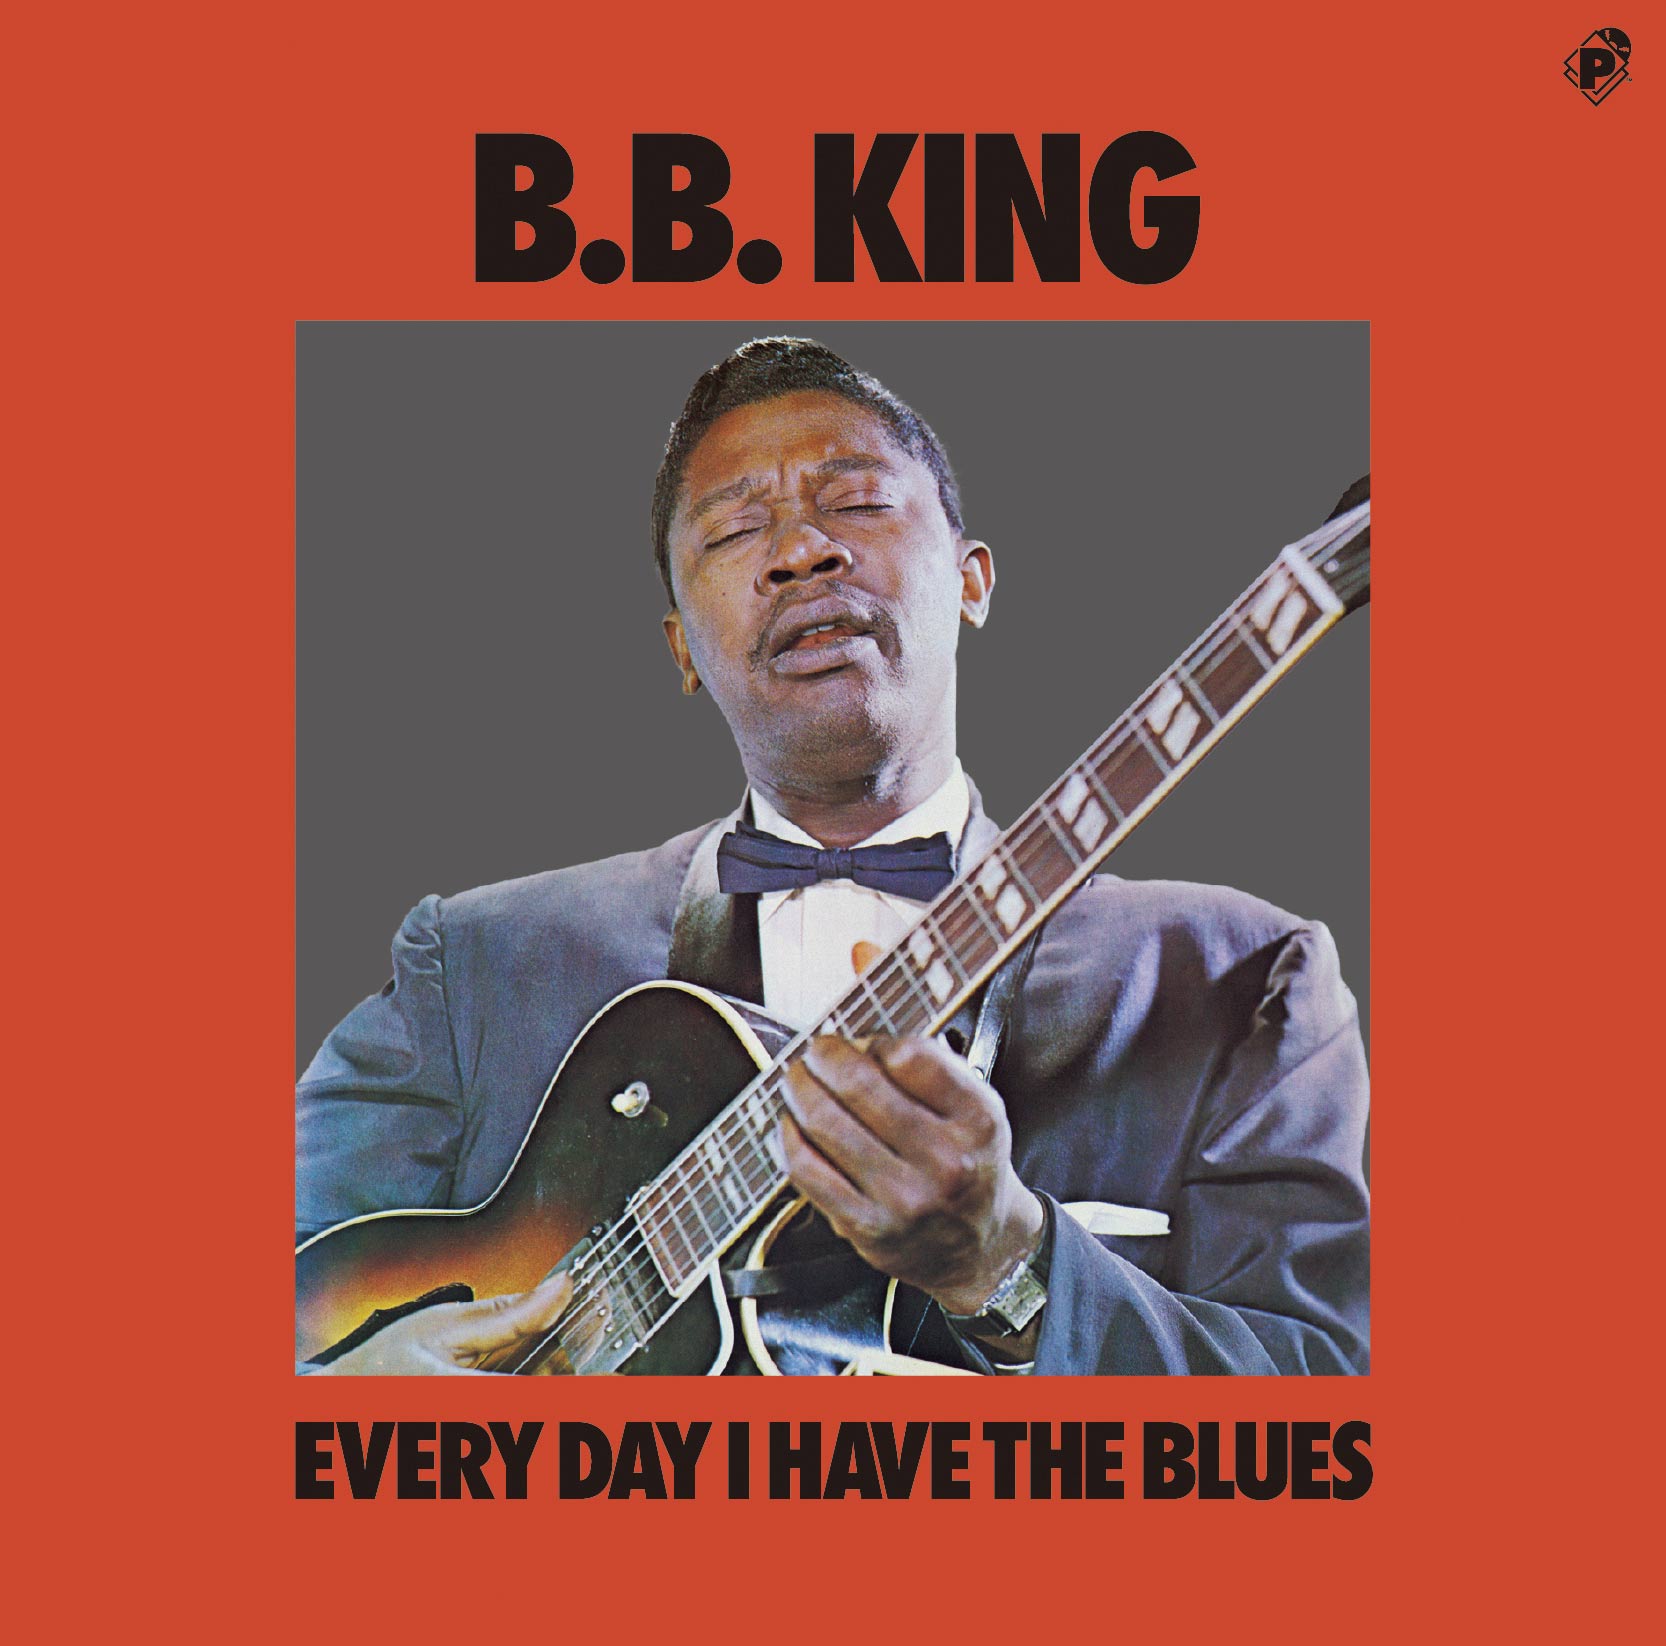 B.B. KING「Every Day I Have The Blues」